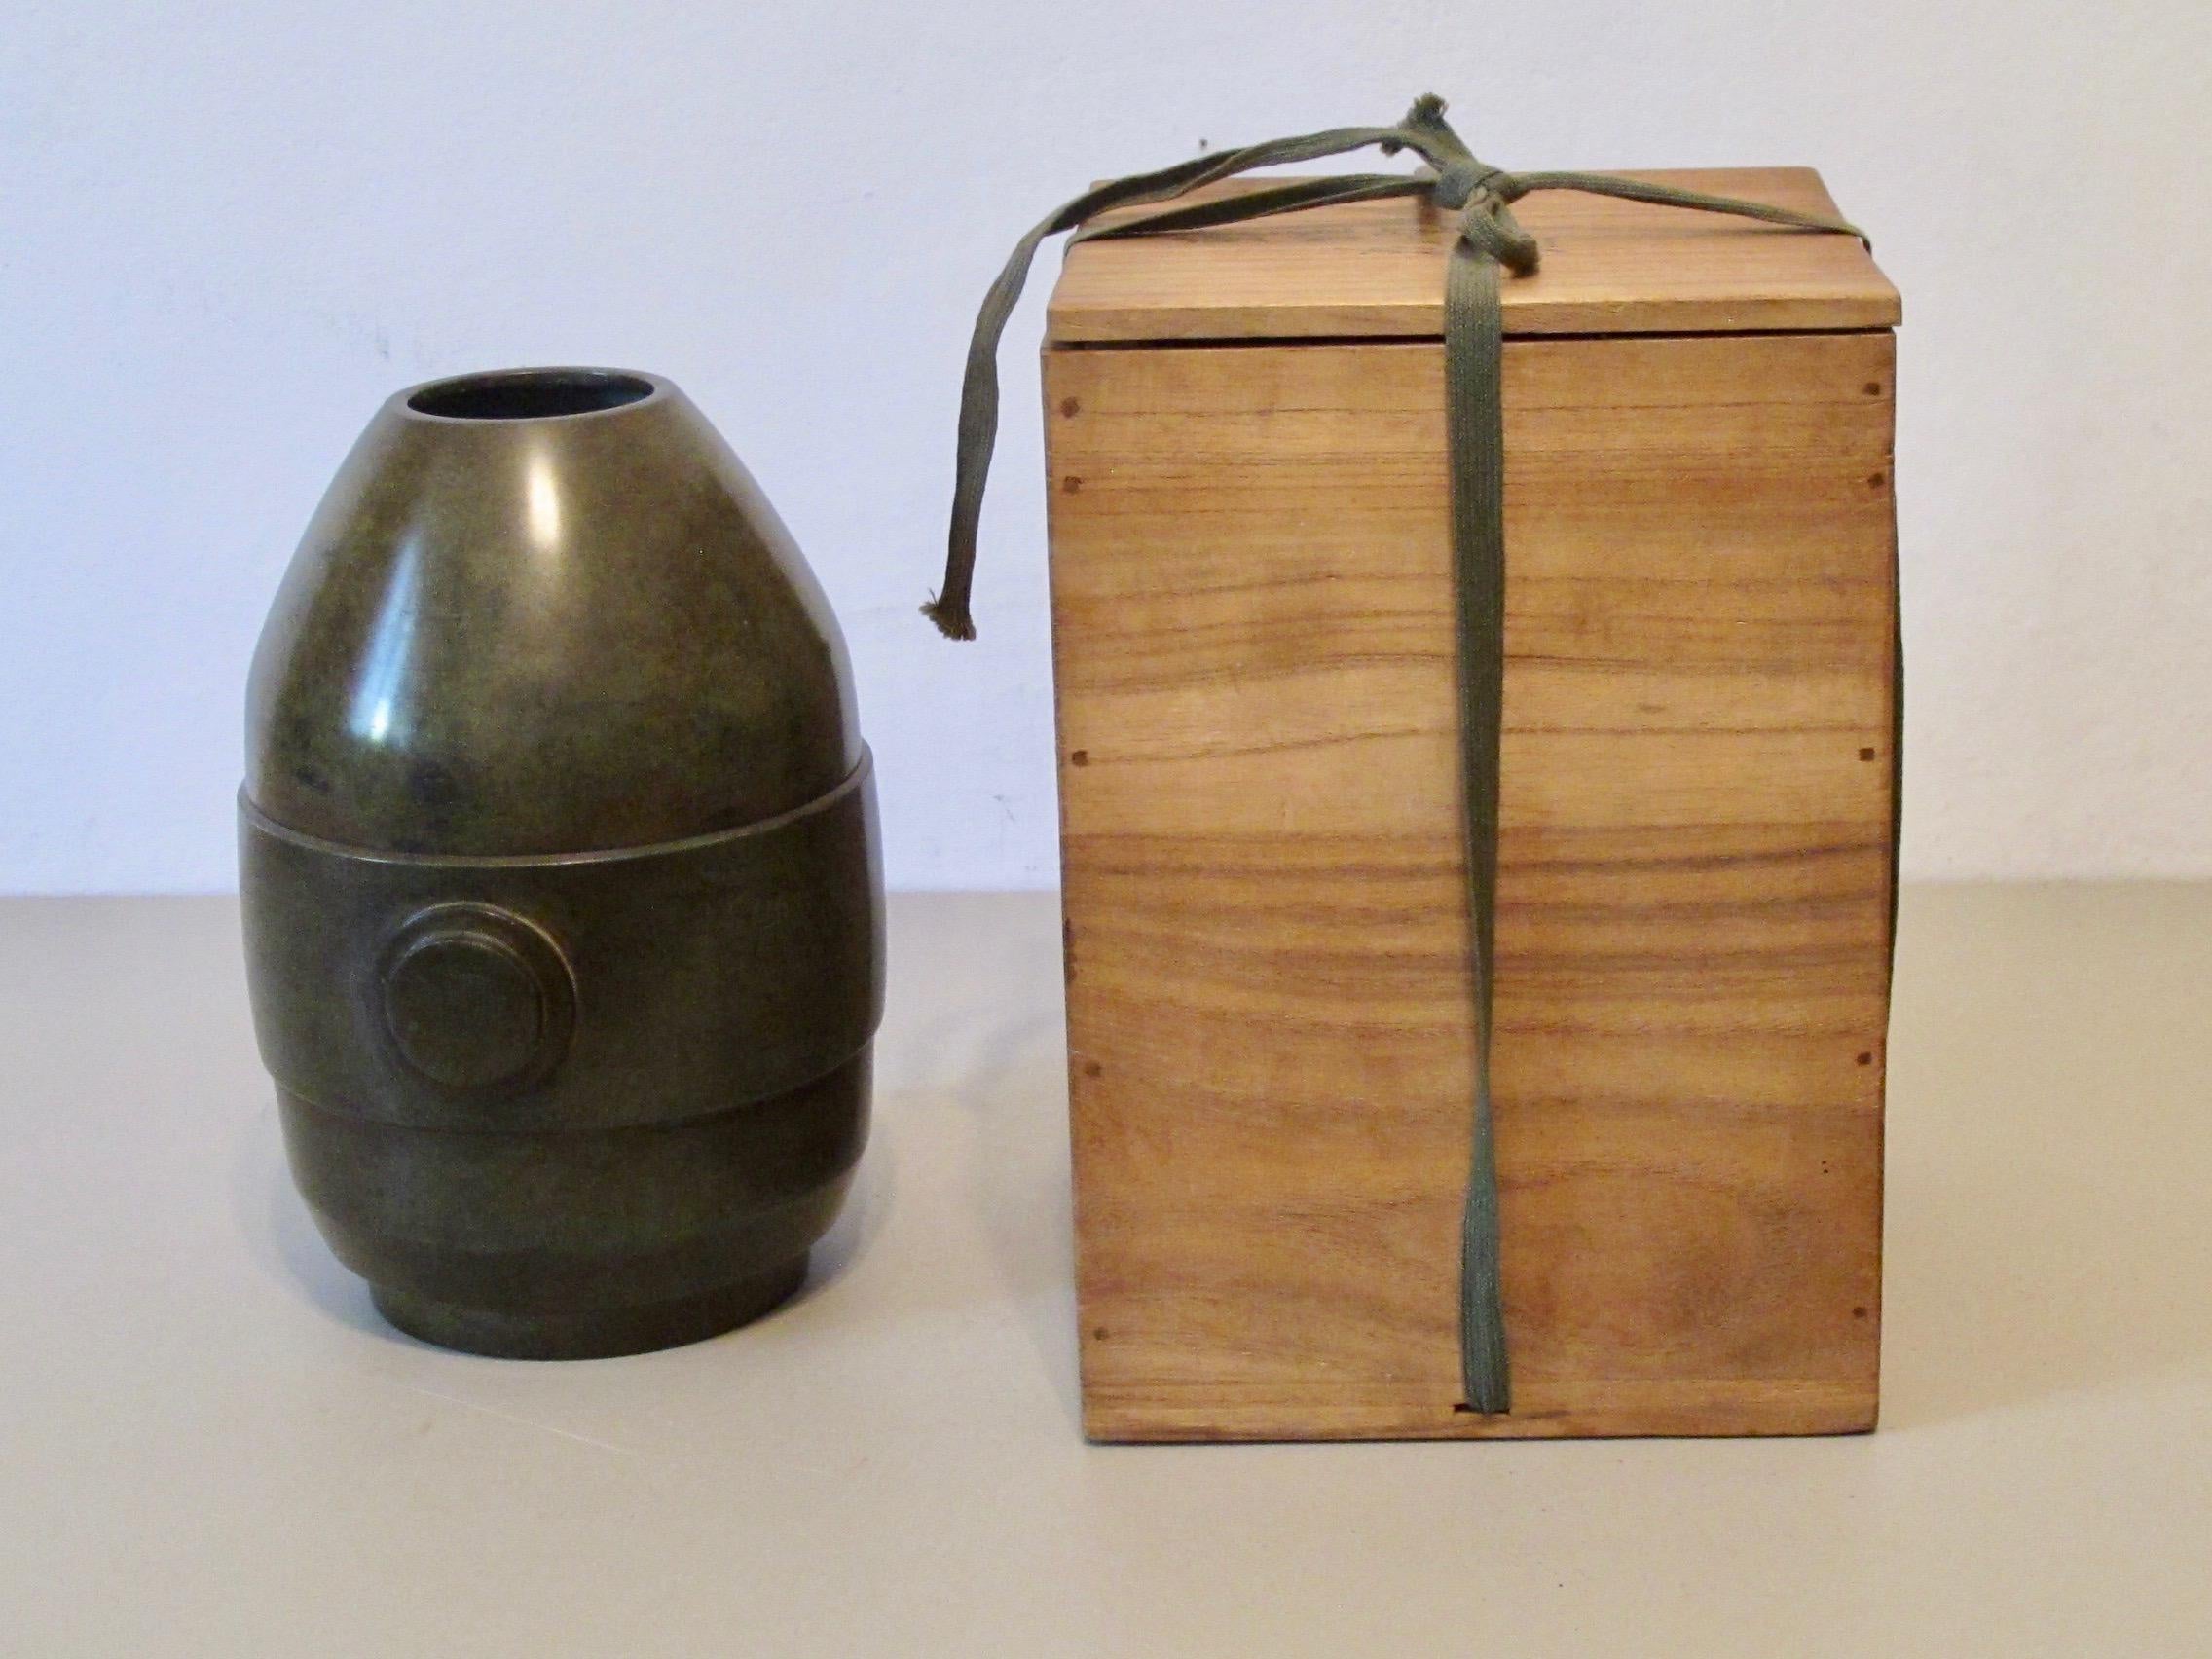 Japanese bronze vase is in the shape of a blast furnace.
Artist: Shoryu, Takaoka-city Toyama Prefecture
Measures: 16.9 x 14.6 x H 21.5 cm
good condition and comes with tomobako.